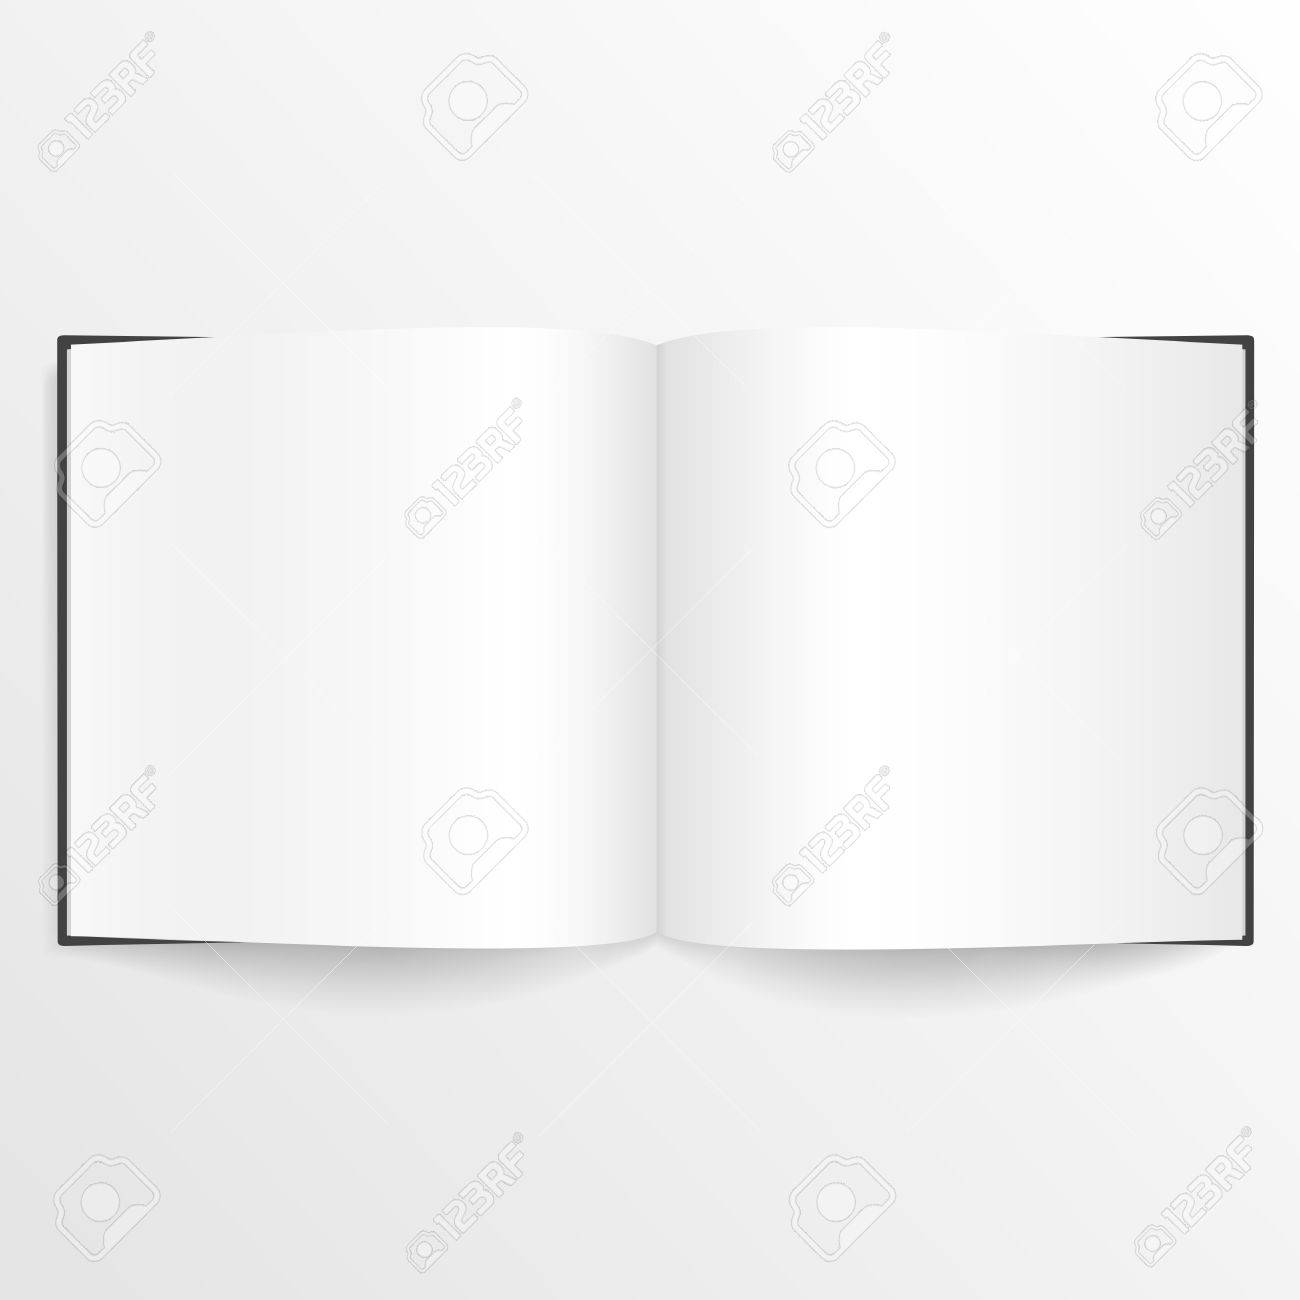 Opened Blank Book Or Magazine Spread Design Template With Cover. With Regard To Blank Magazine Spread Template